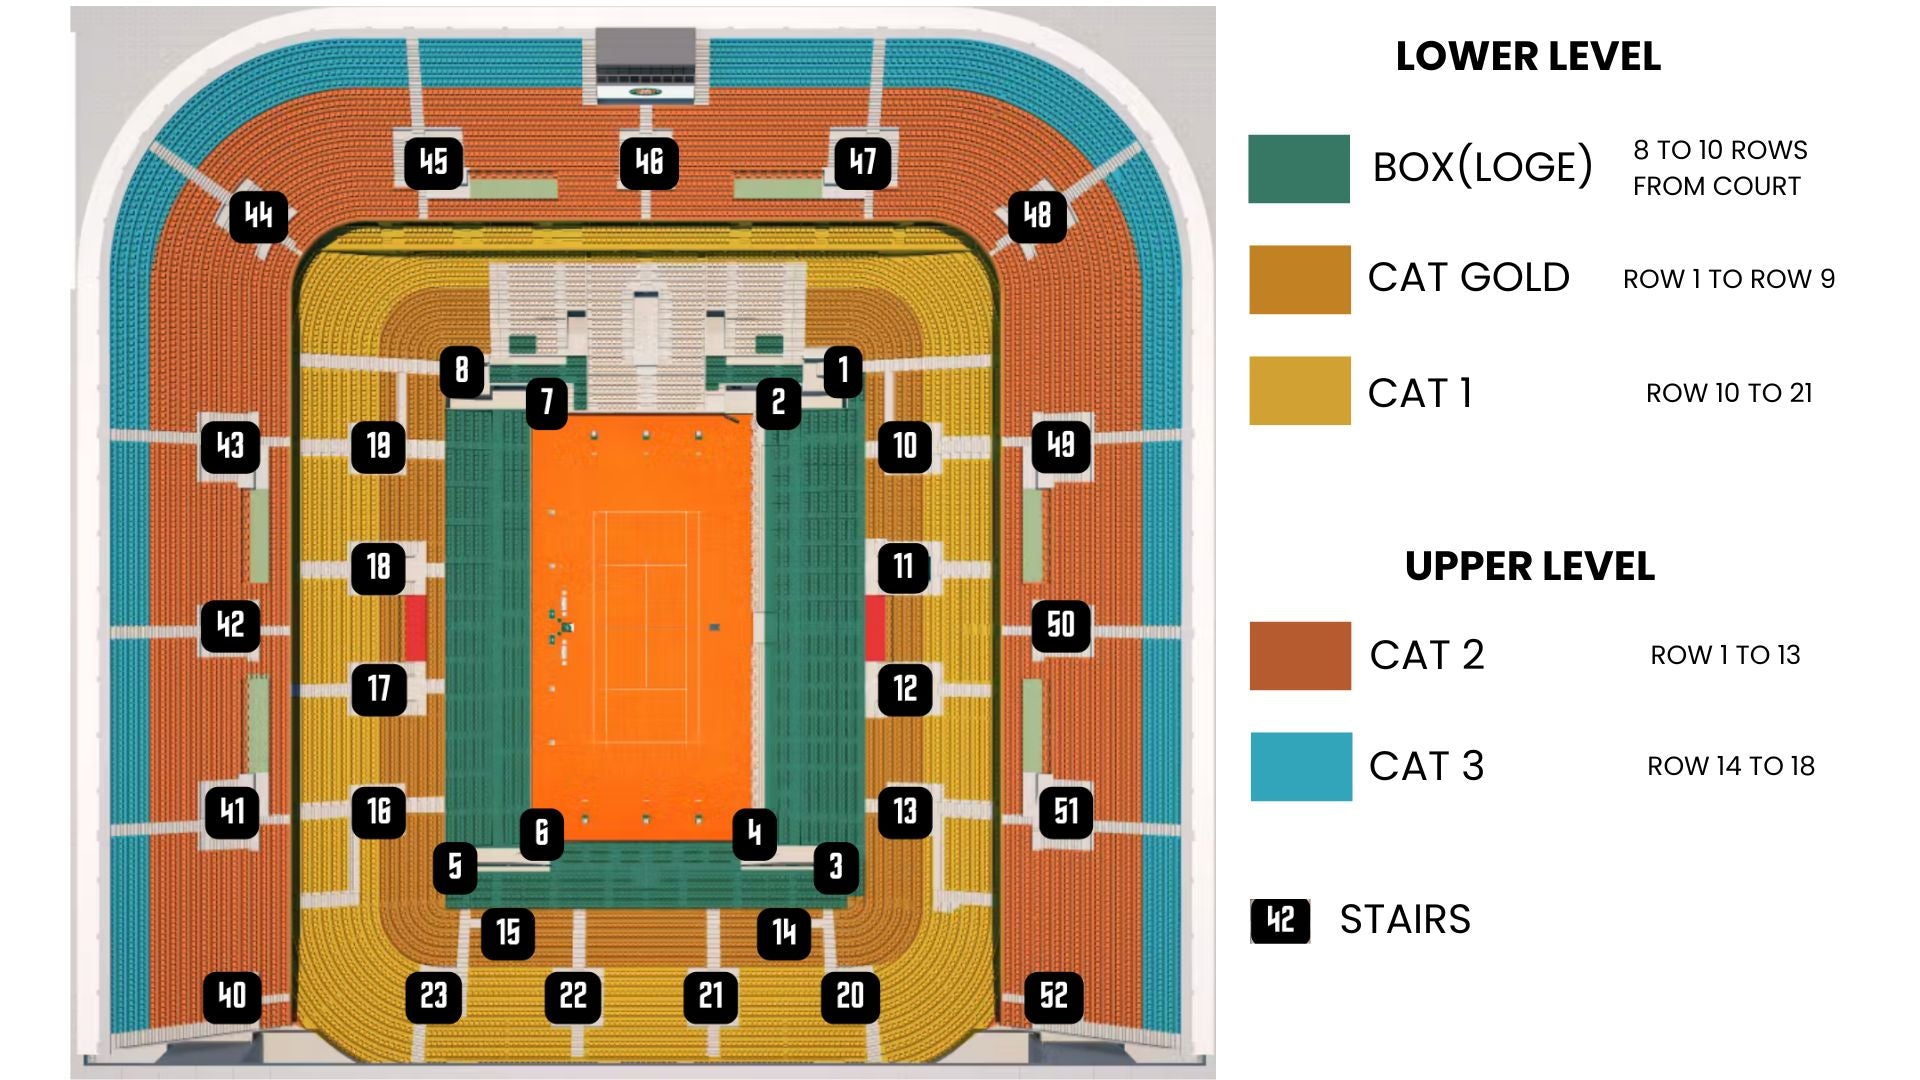 French Open Tickets 5/28/2025 - Wednesday Night Session - Philippe Chatrier (Center Court)